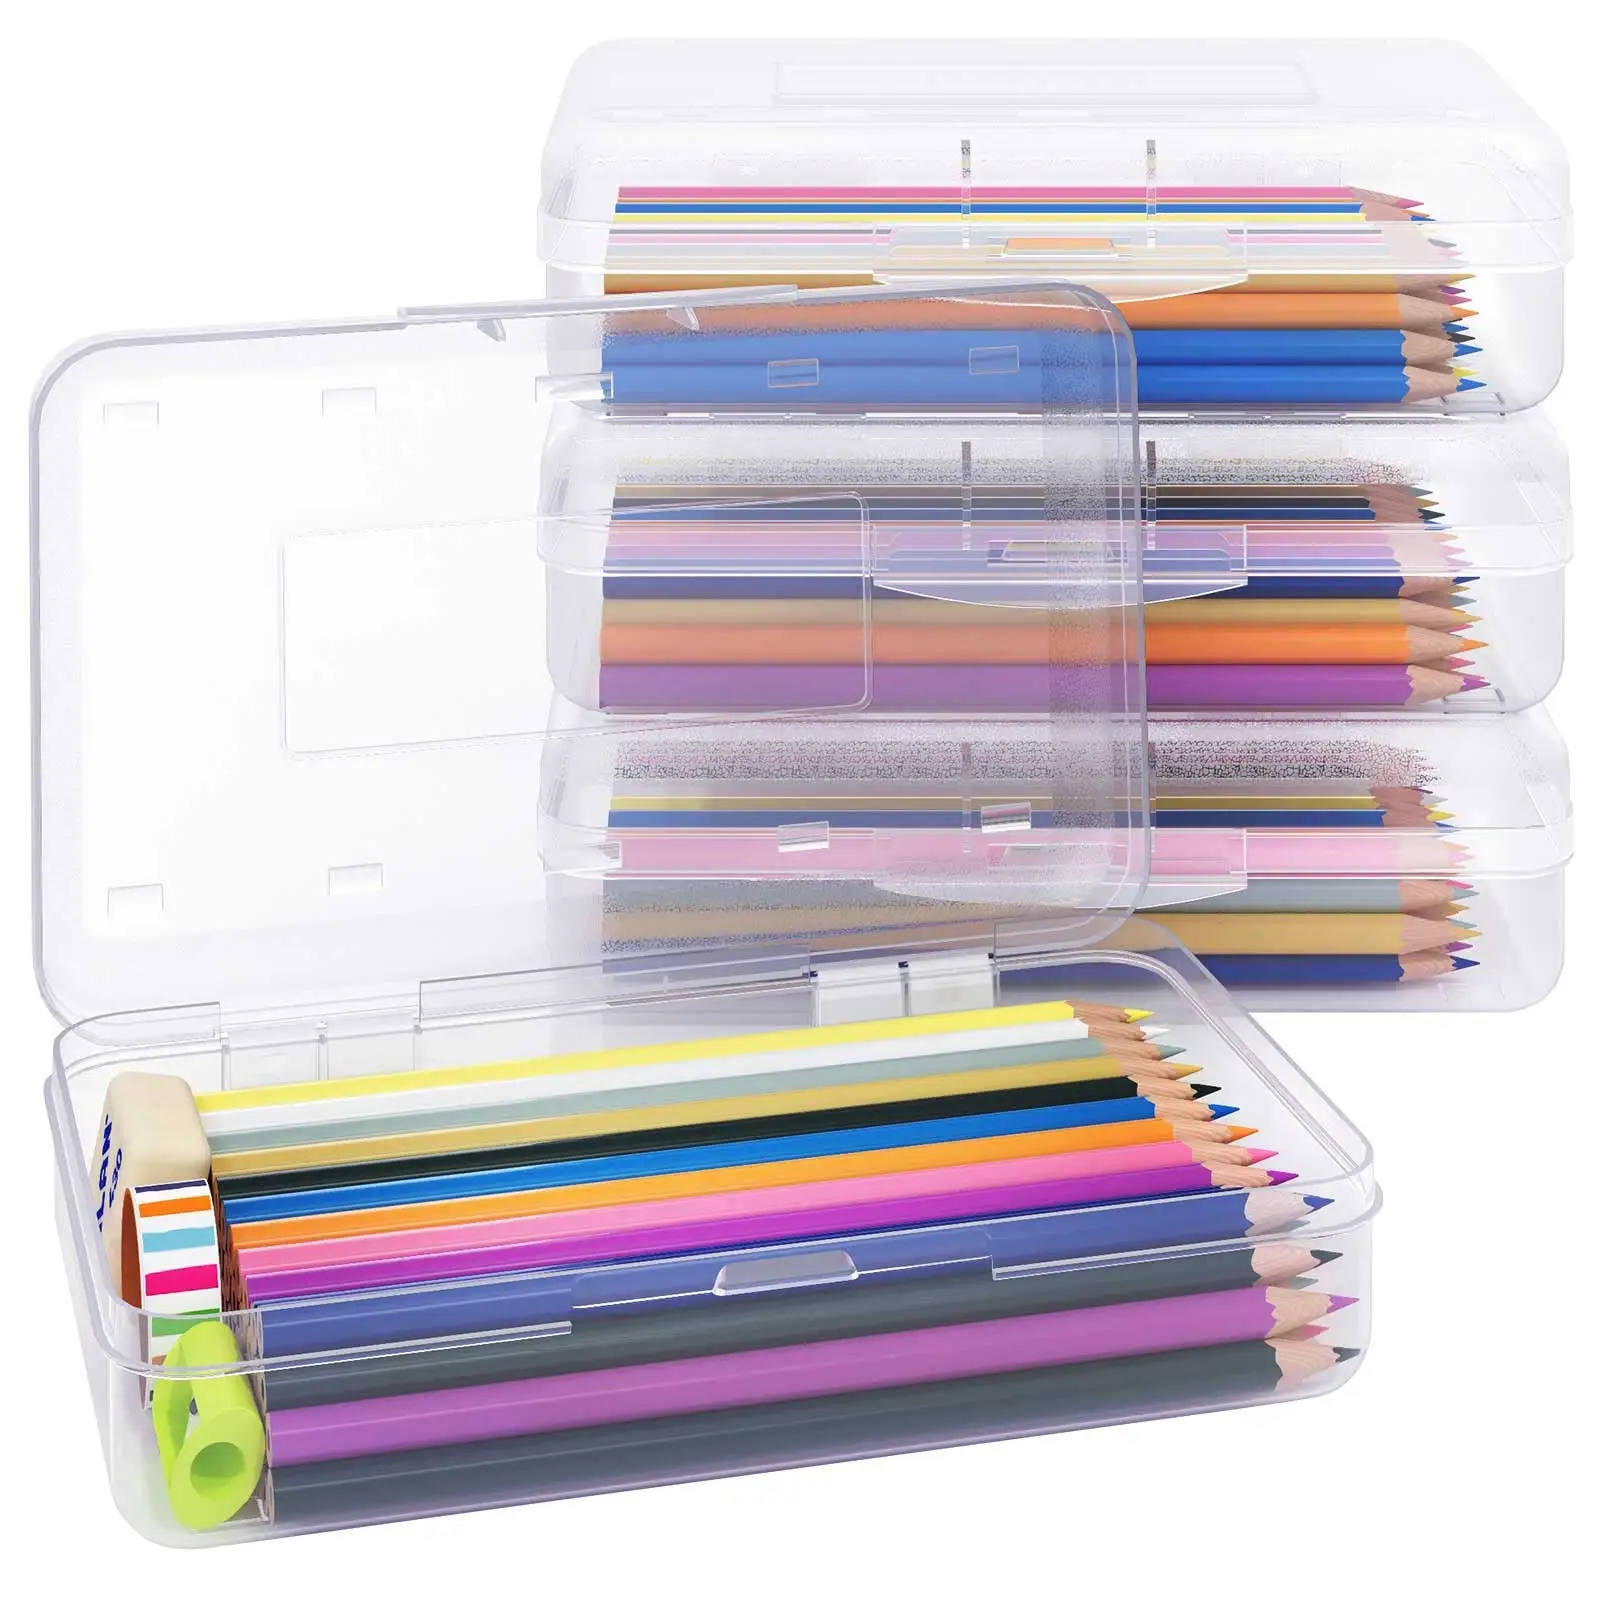 NISEVEN 4 Packs Large Capacity Office Supplies Storage Organizer Box Crayon Box Storage with Snap-Tight Lid Stackable Pencil Box